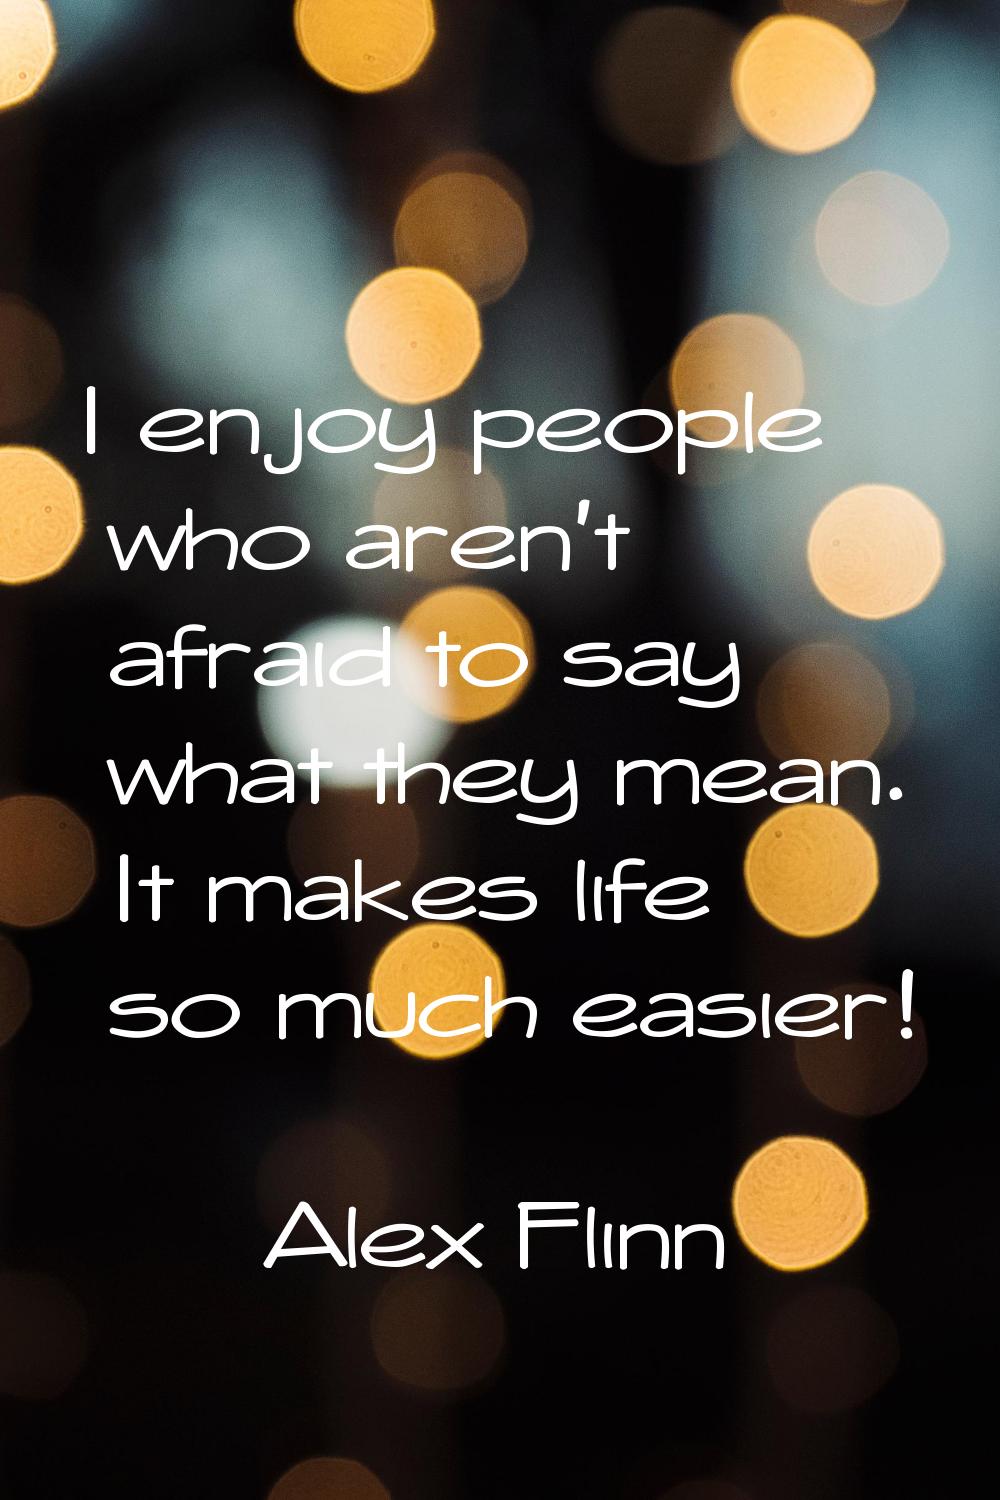 I enjoy people who aren't afraid to say what they mean. It makes life so much easier!